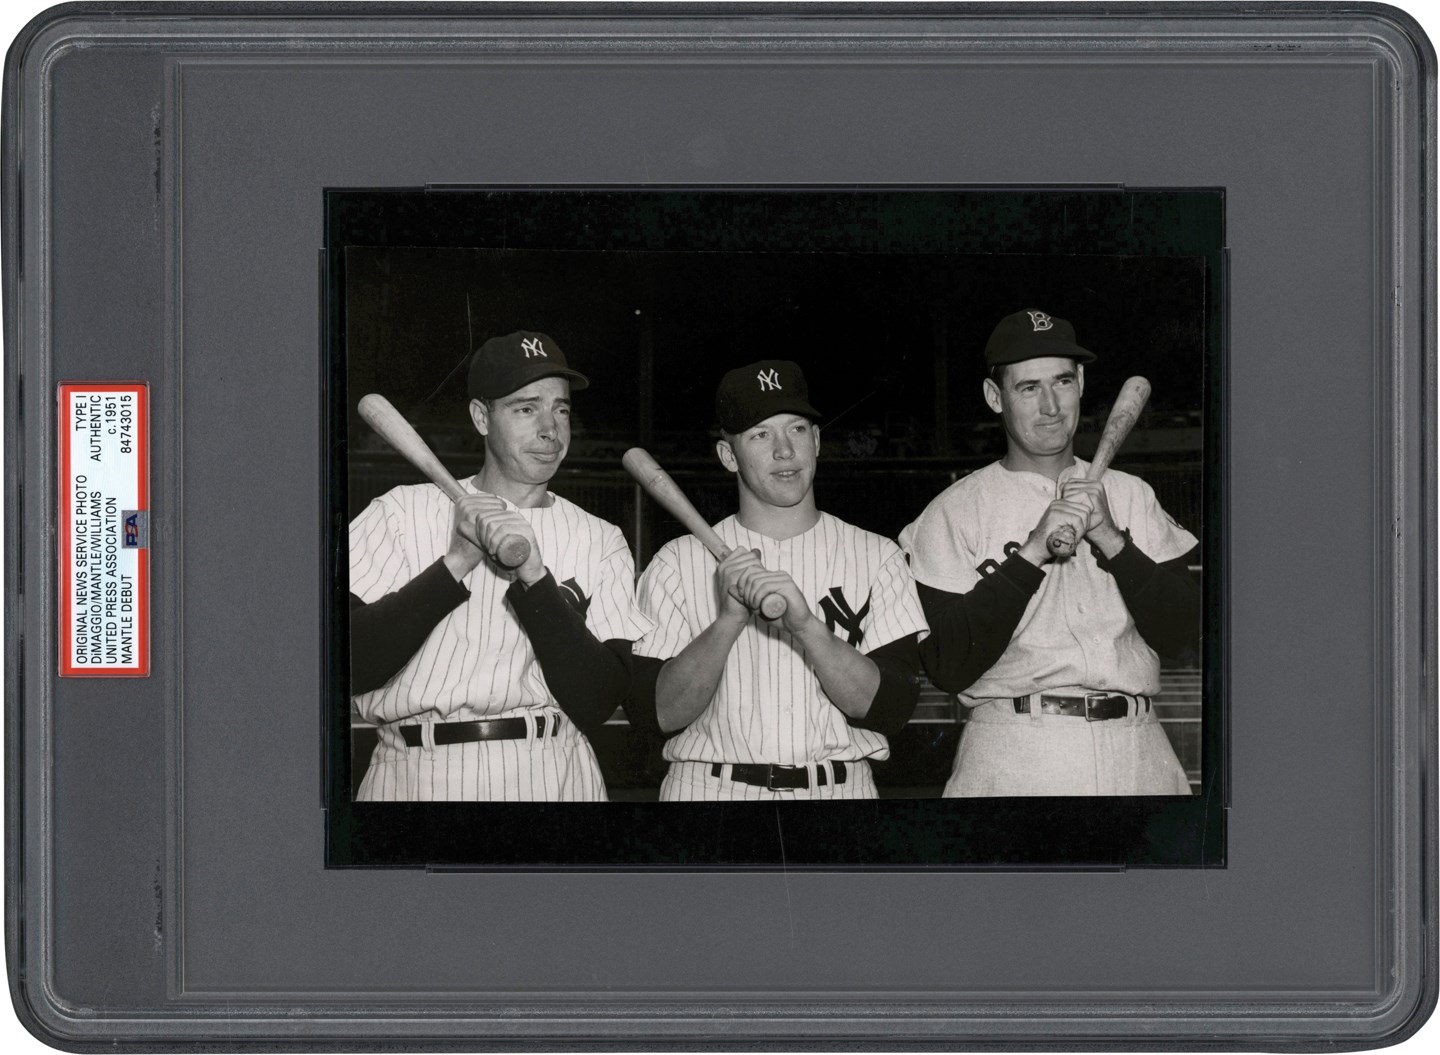 Mantle and Maris - 1951 Mickey Mantle MLB Debut Photograph w/DiMaggio & Williams (PSA Type I)